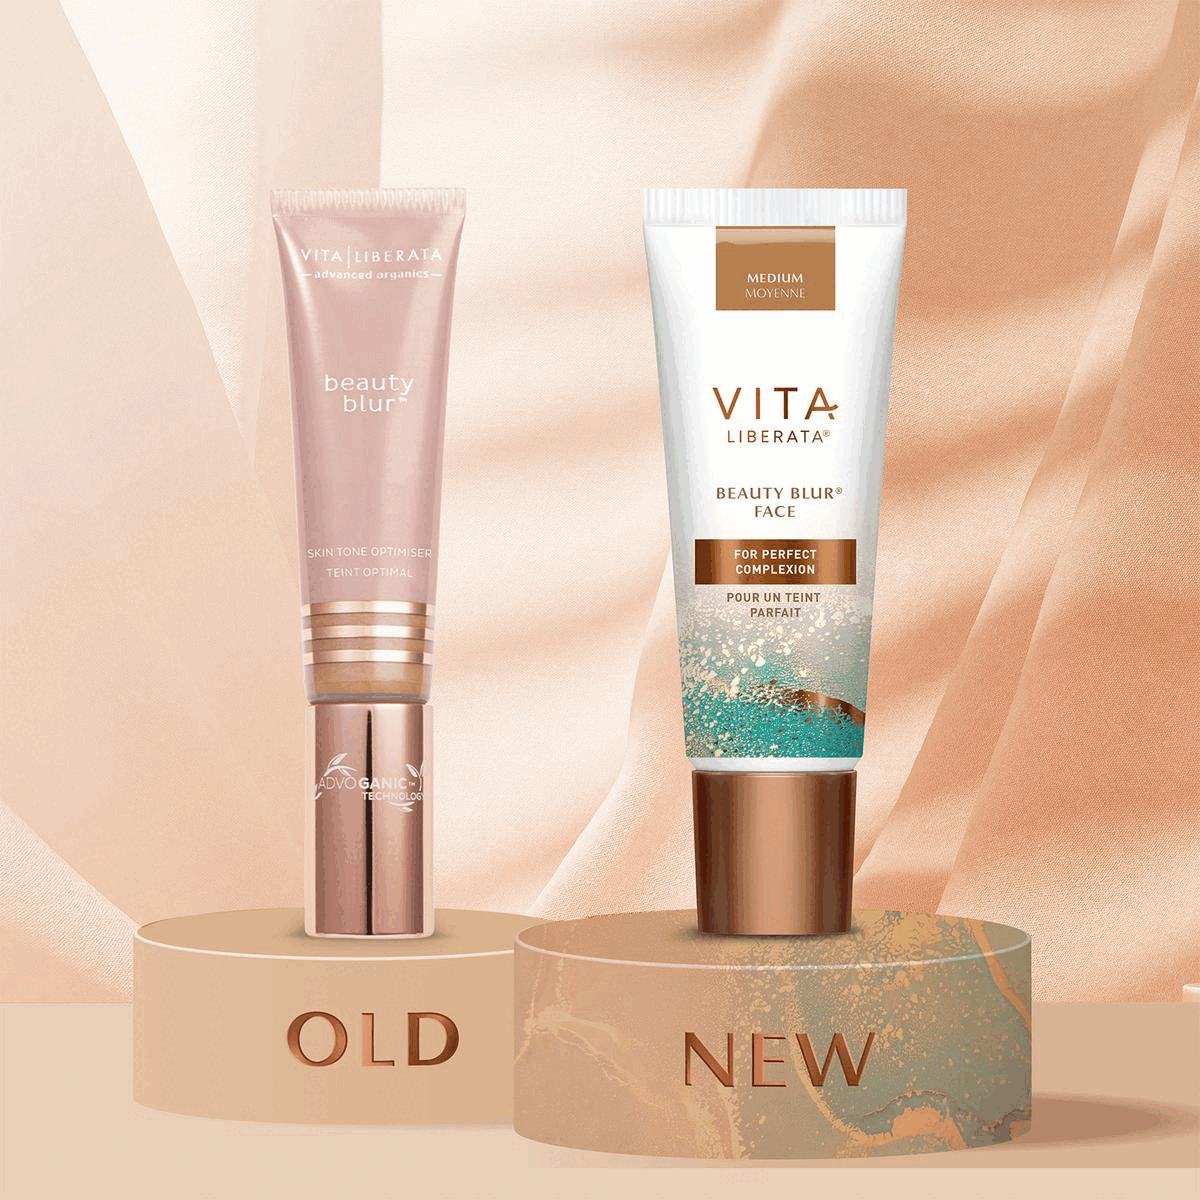 Two images transiting into each other in an endless loop. Image One: Showing the old packaging and the new product packaging. Text: Old New. Image Two: Showing a before and after shot. Text: Vita Liberata Real Real Results